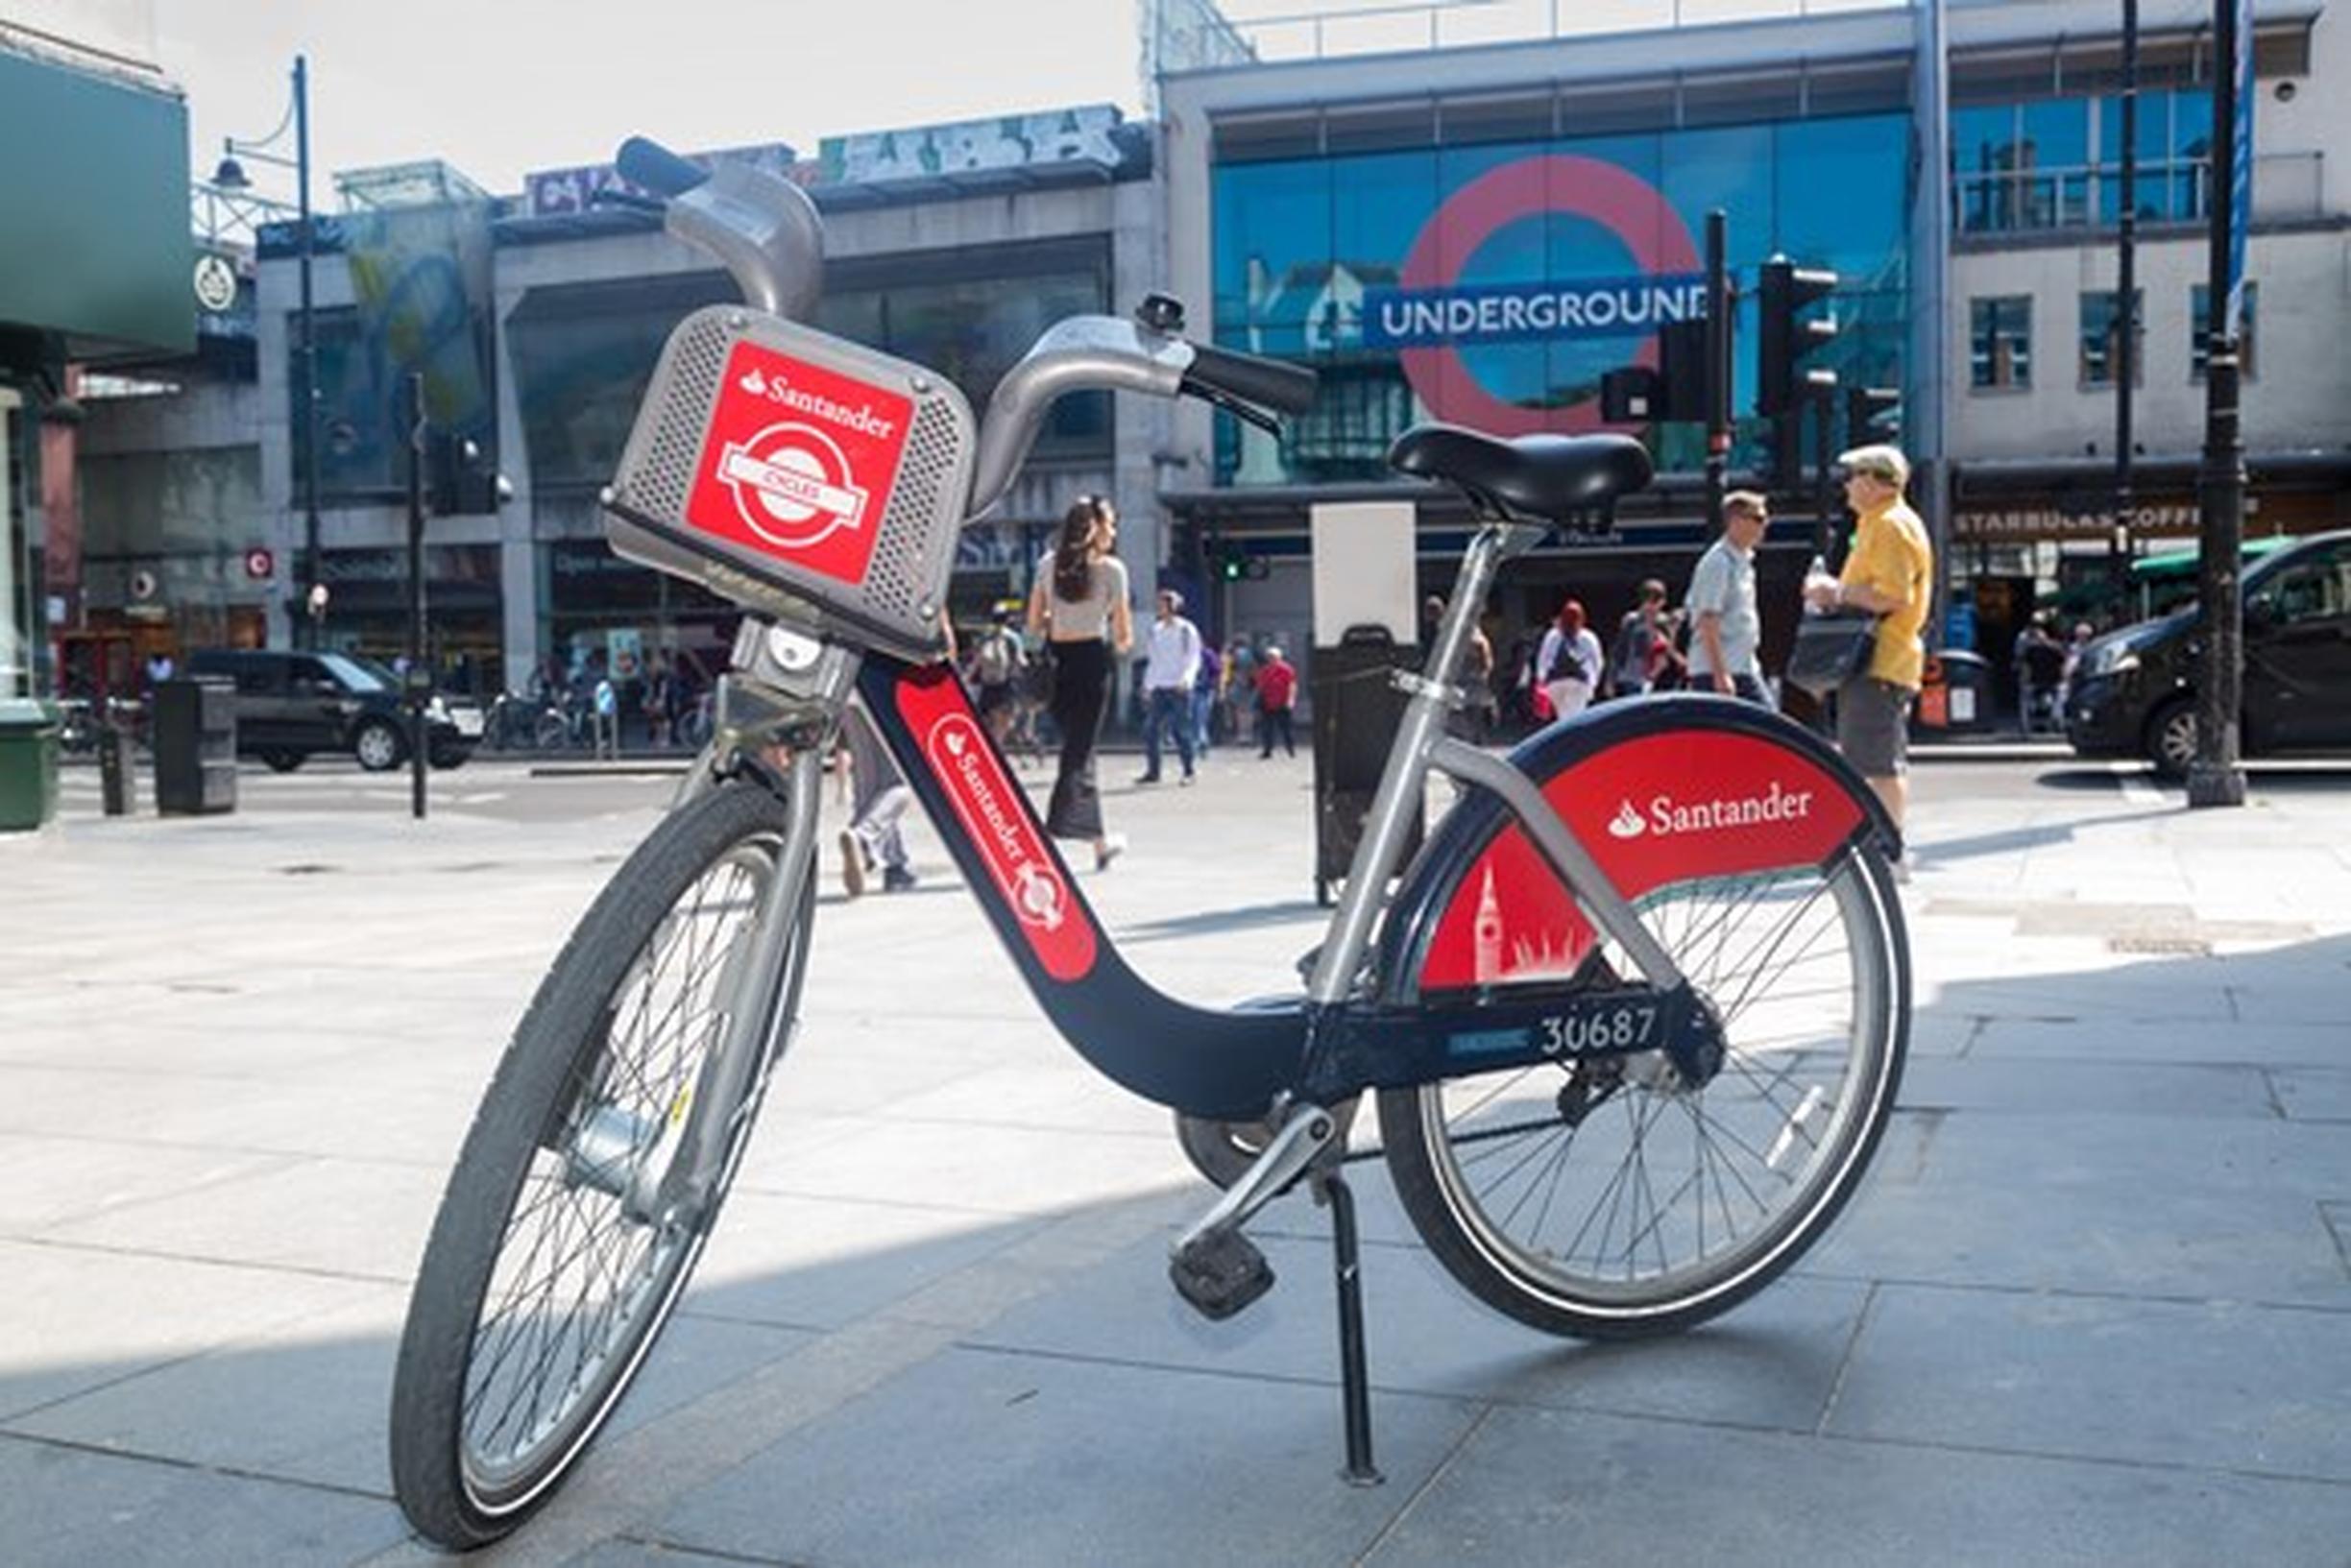 The red livery of Santander Cycles is a familiar sight on London’s streets